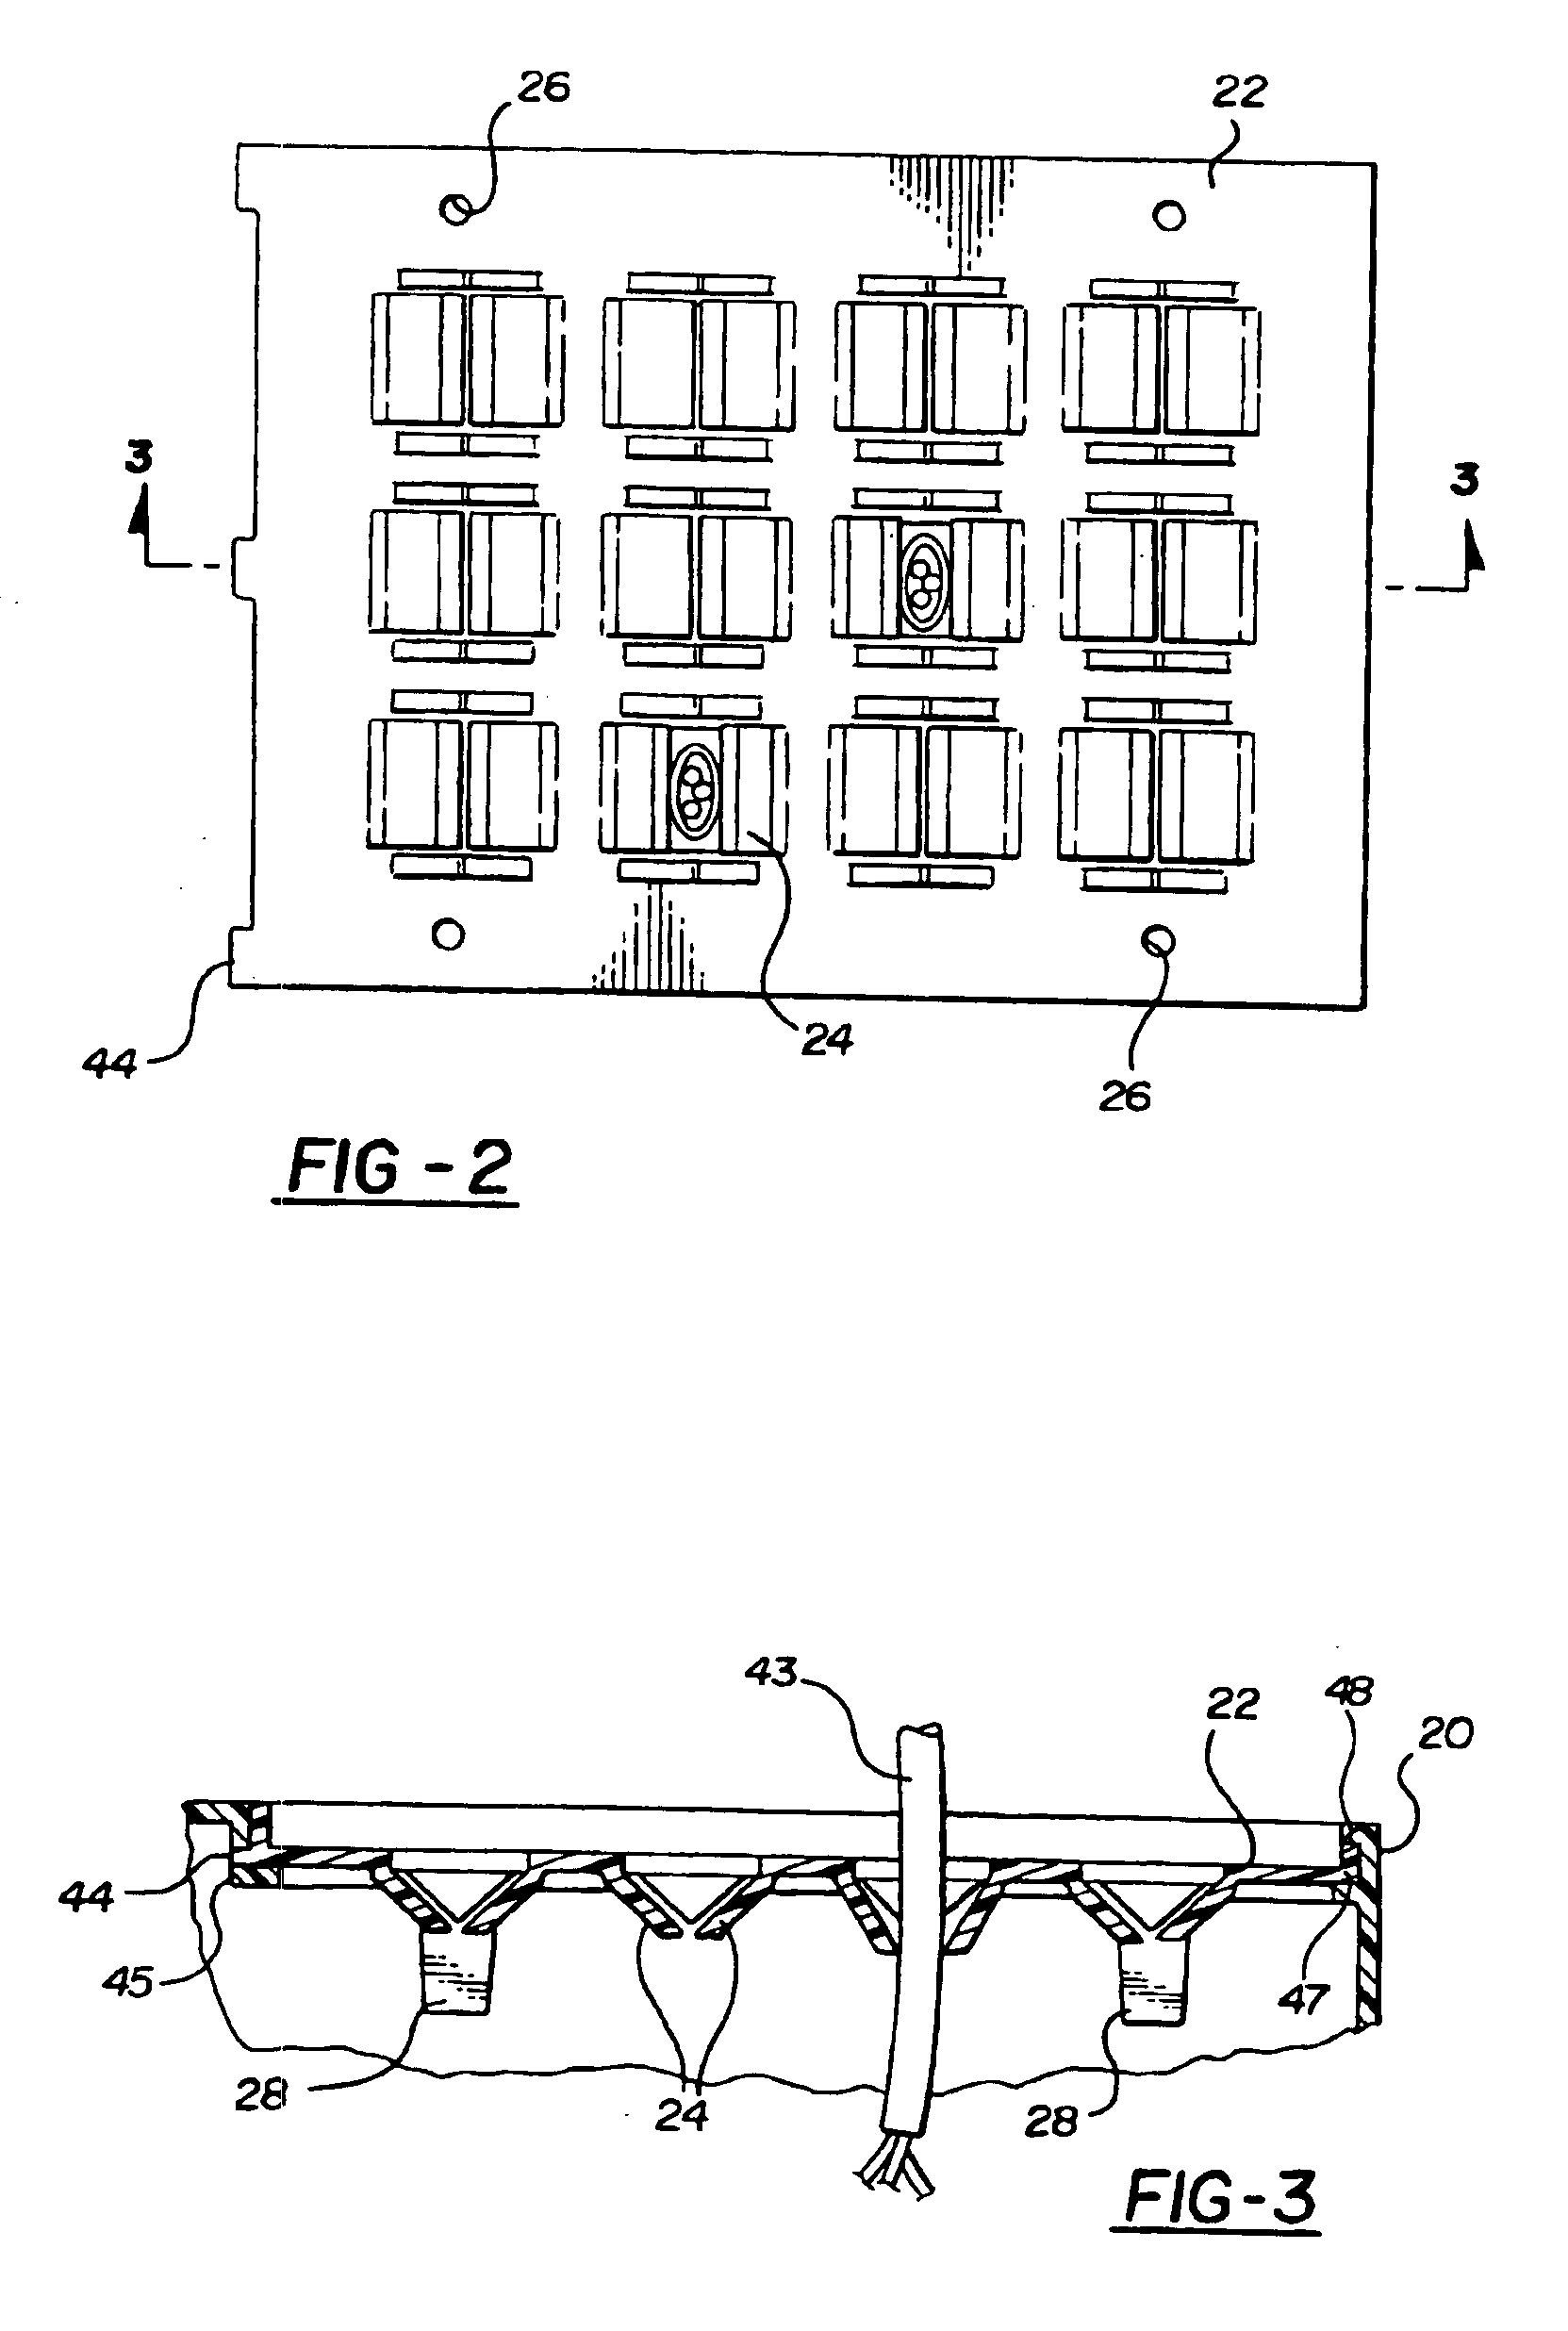 Electrical housing with non-integral cable outlet port member